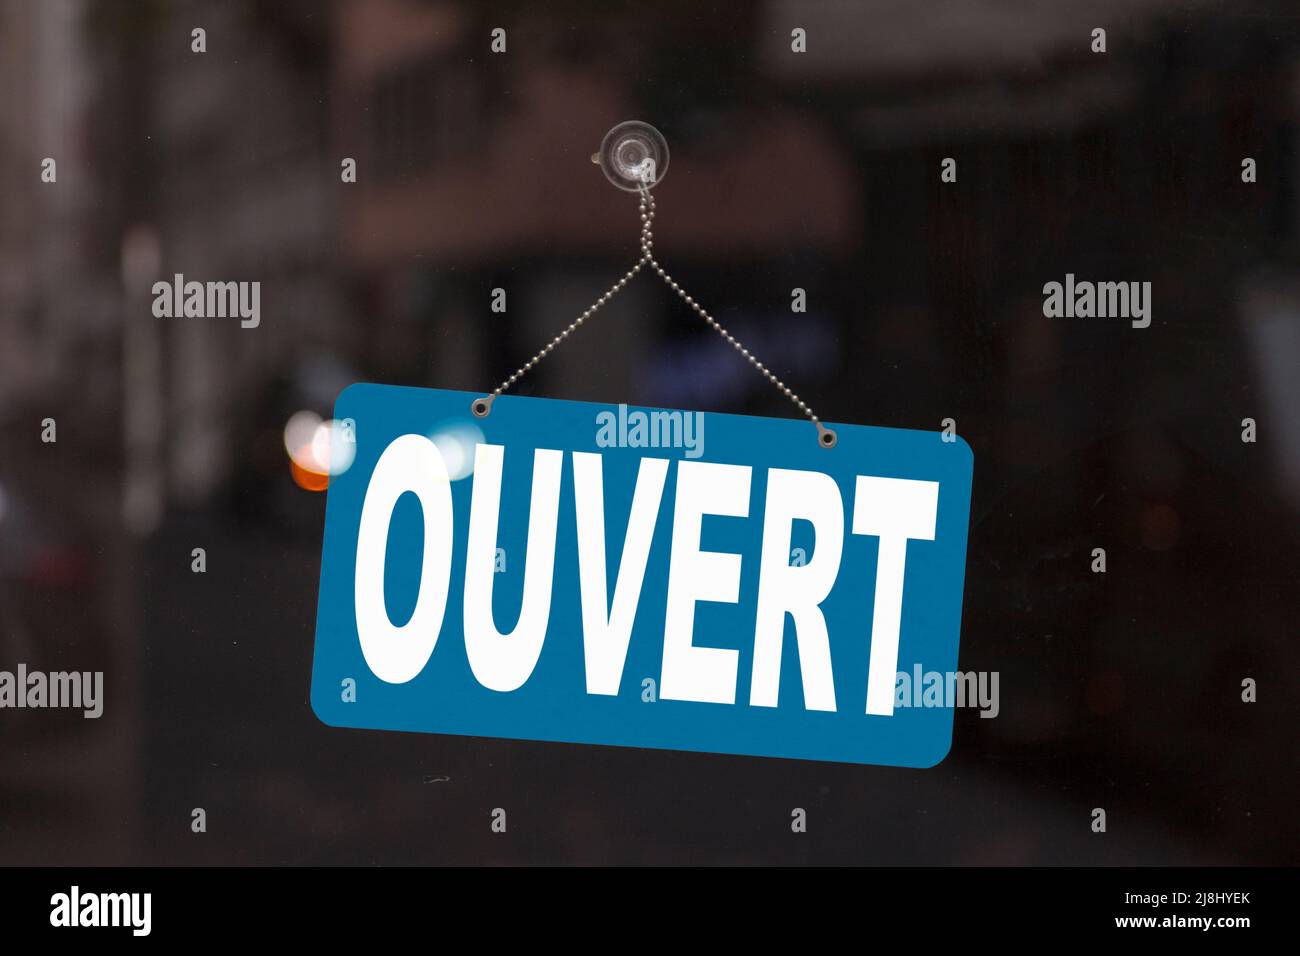 Close-up on a blue sign in the window of a shop displaying the message in French - Ouvert - meaning in English - Open -. Stock Photo